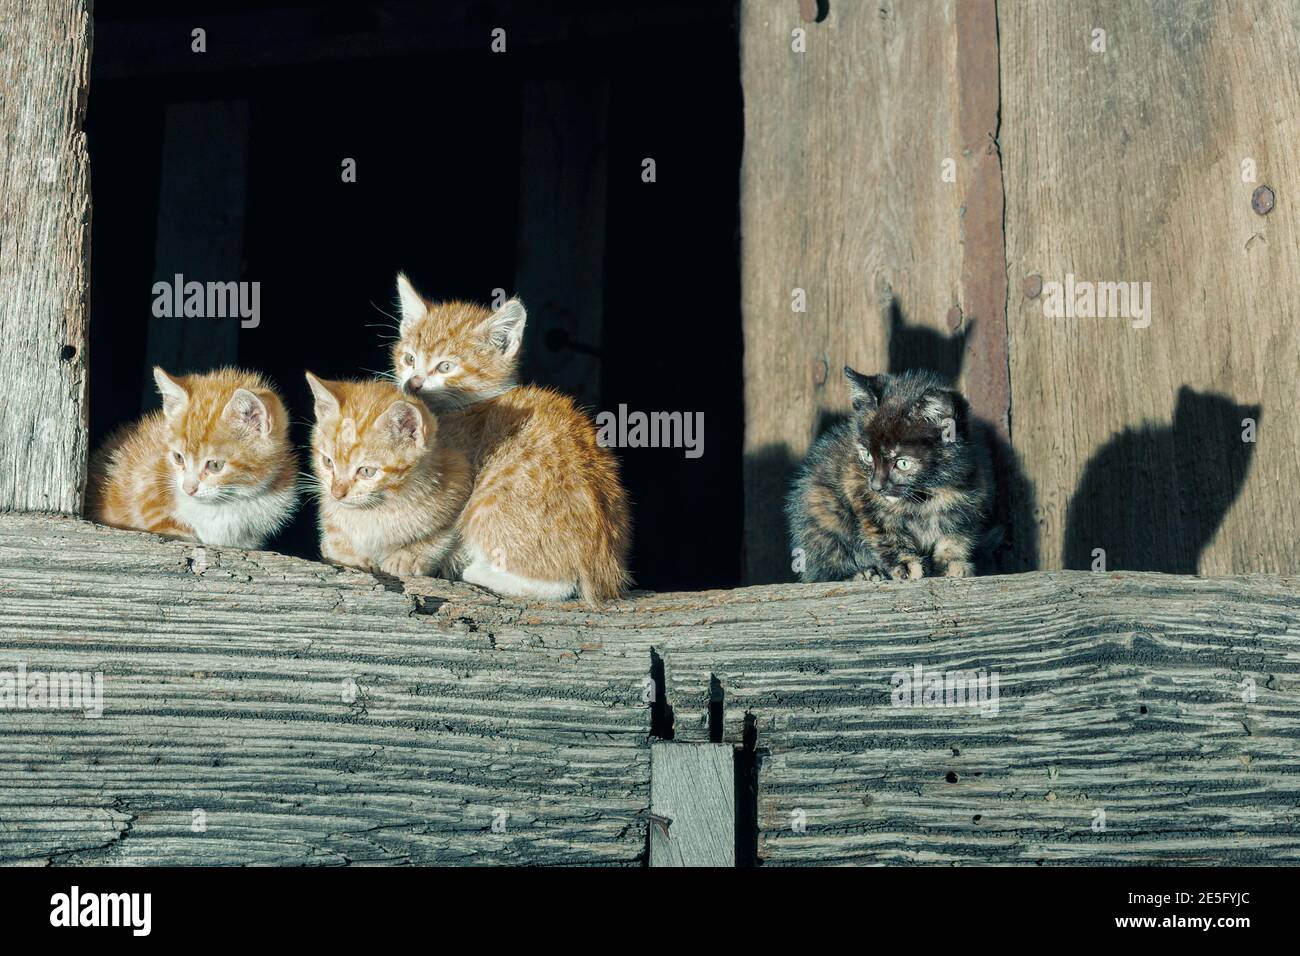 cats in a town in the council of Aller in Asturias, Spain.In the photograph there are four cats, three orange and white cats and a black cat.Cats are Stock Photo